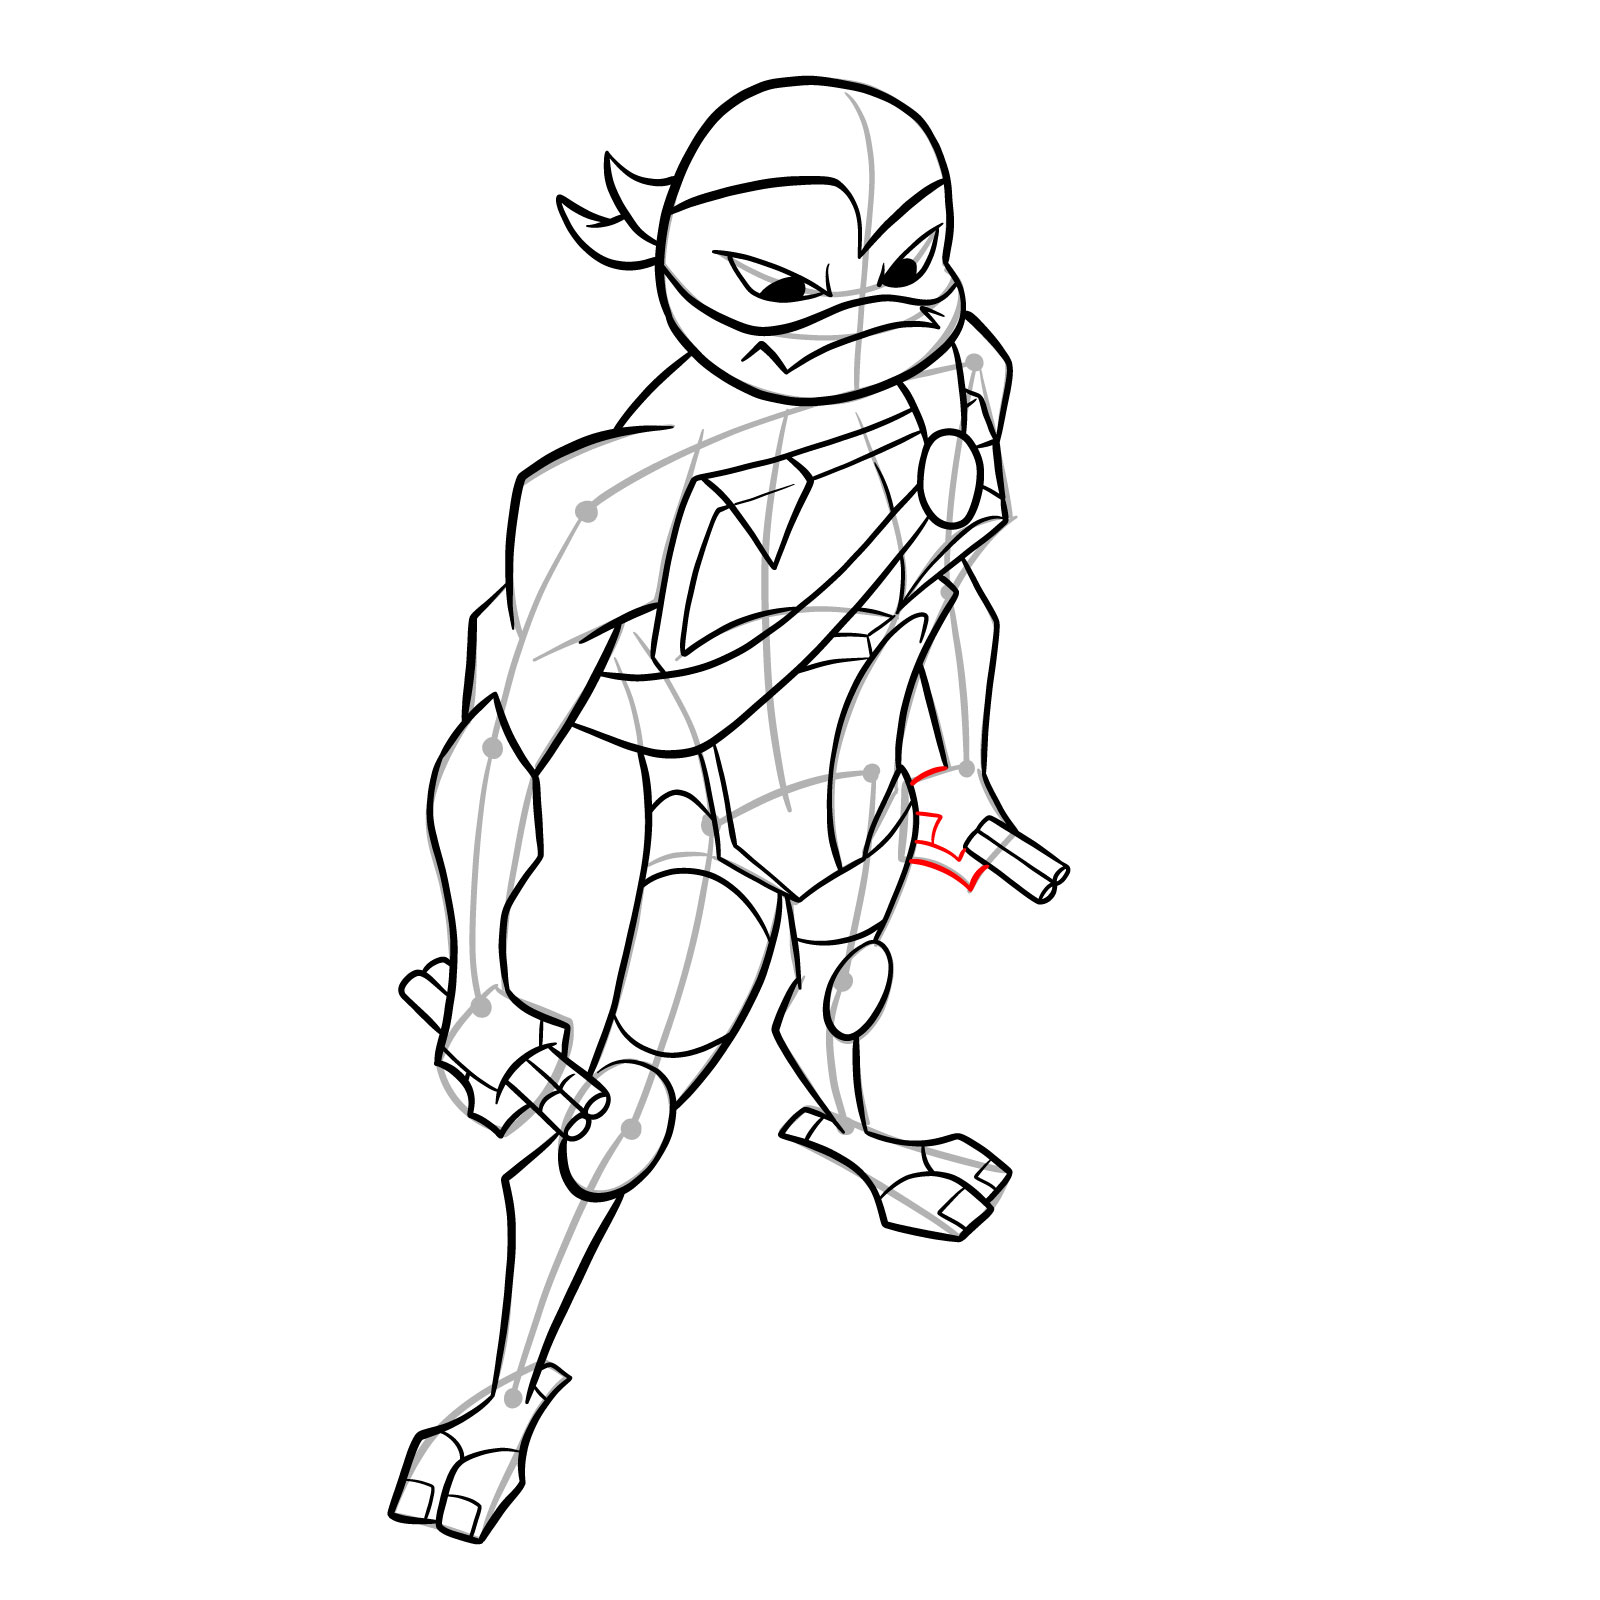 How to draw Mikey in Hamato Ninpō state - step 33